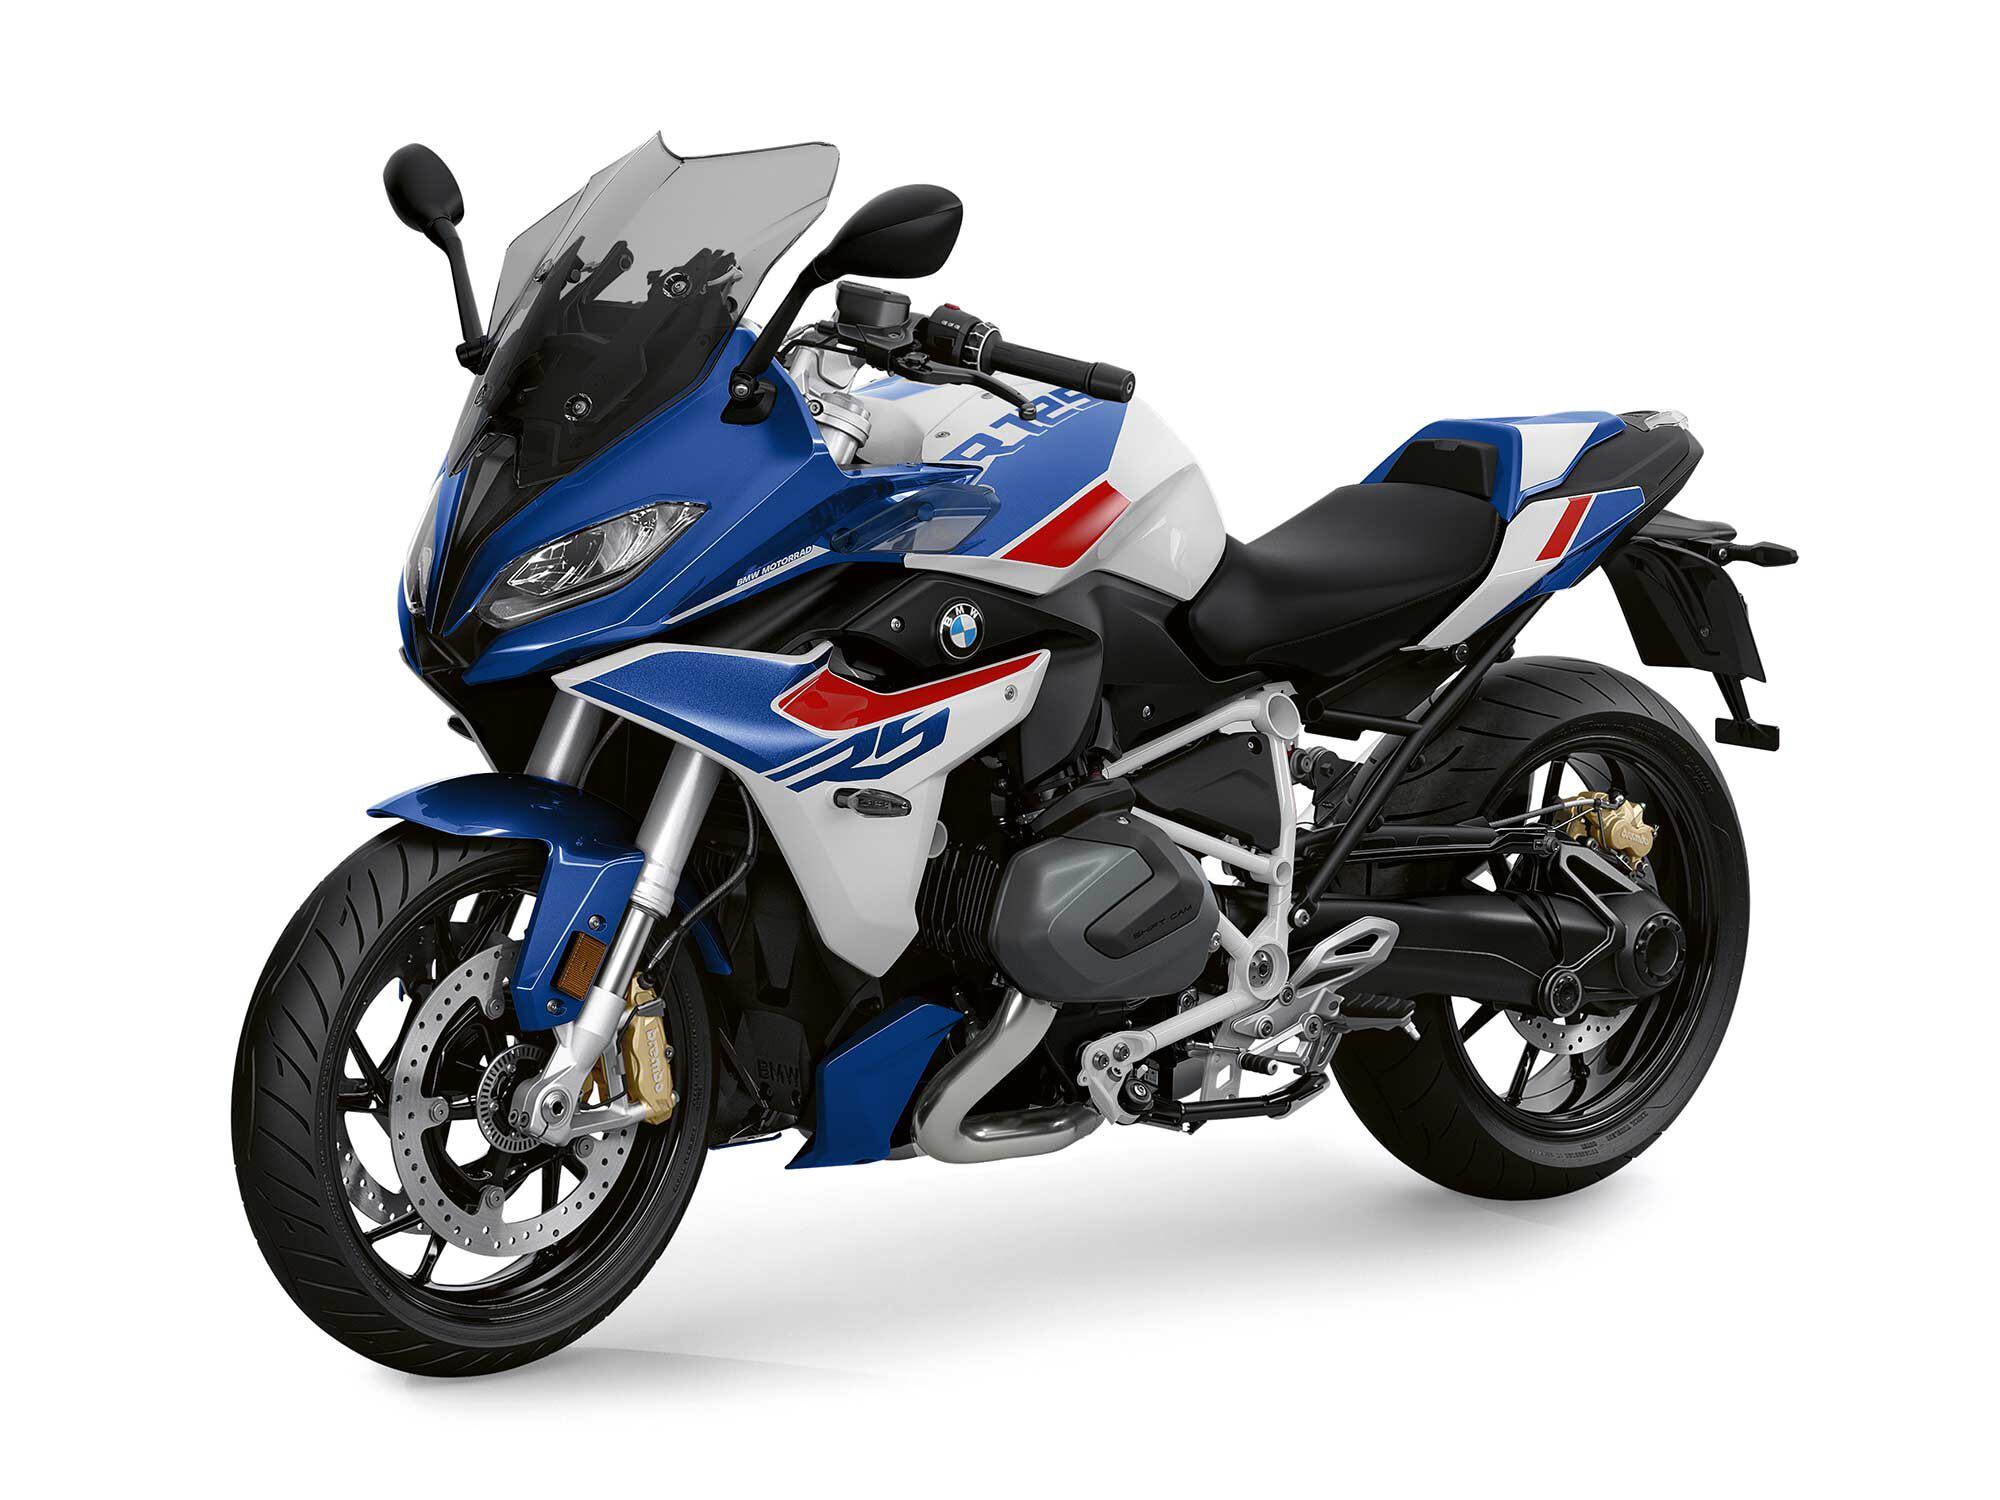 Bmw R Rs First Look Motorcycle Reviews Motorcycle Riders